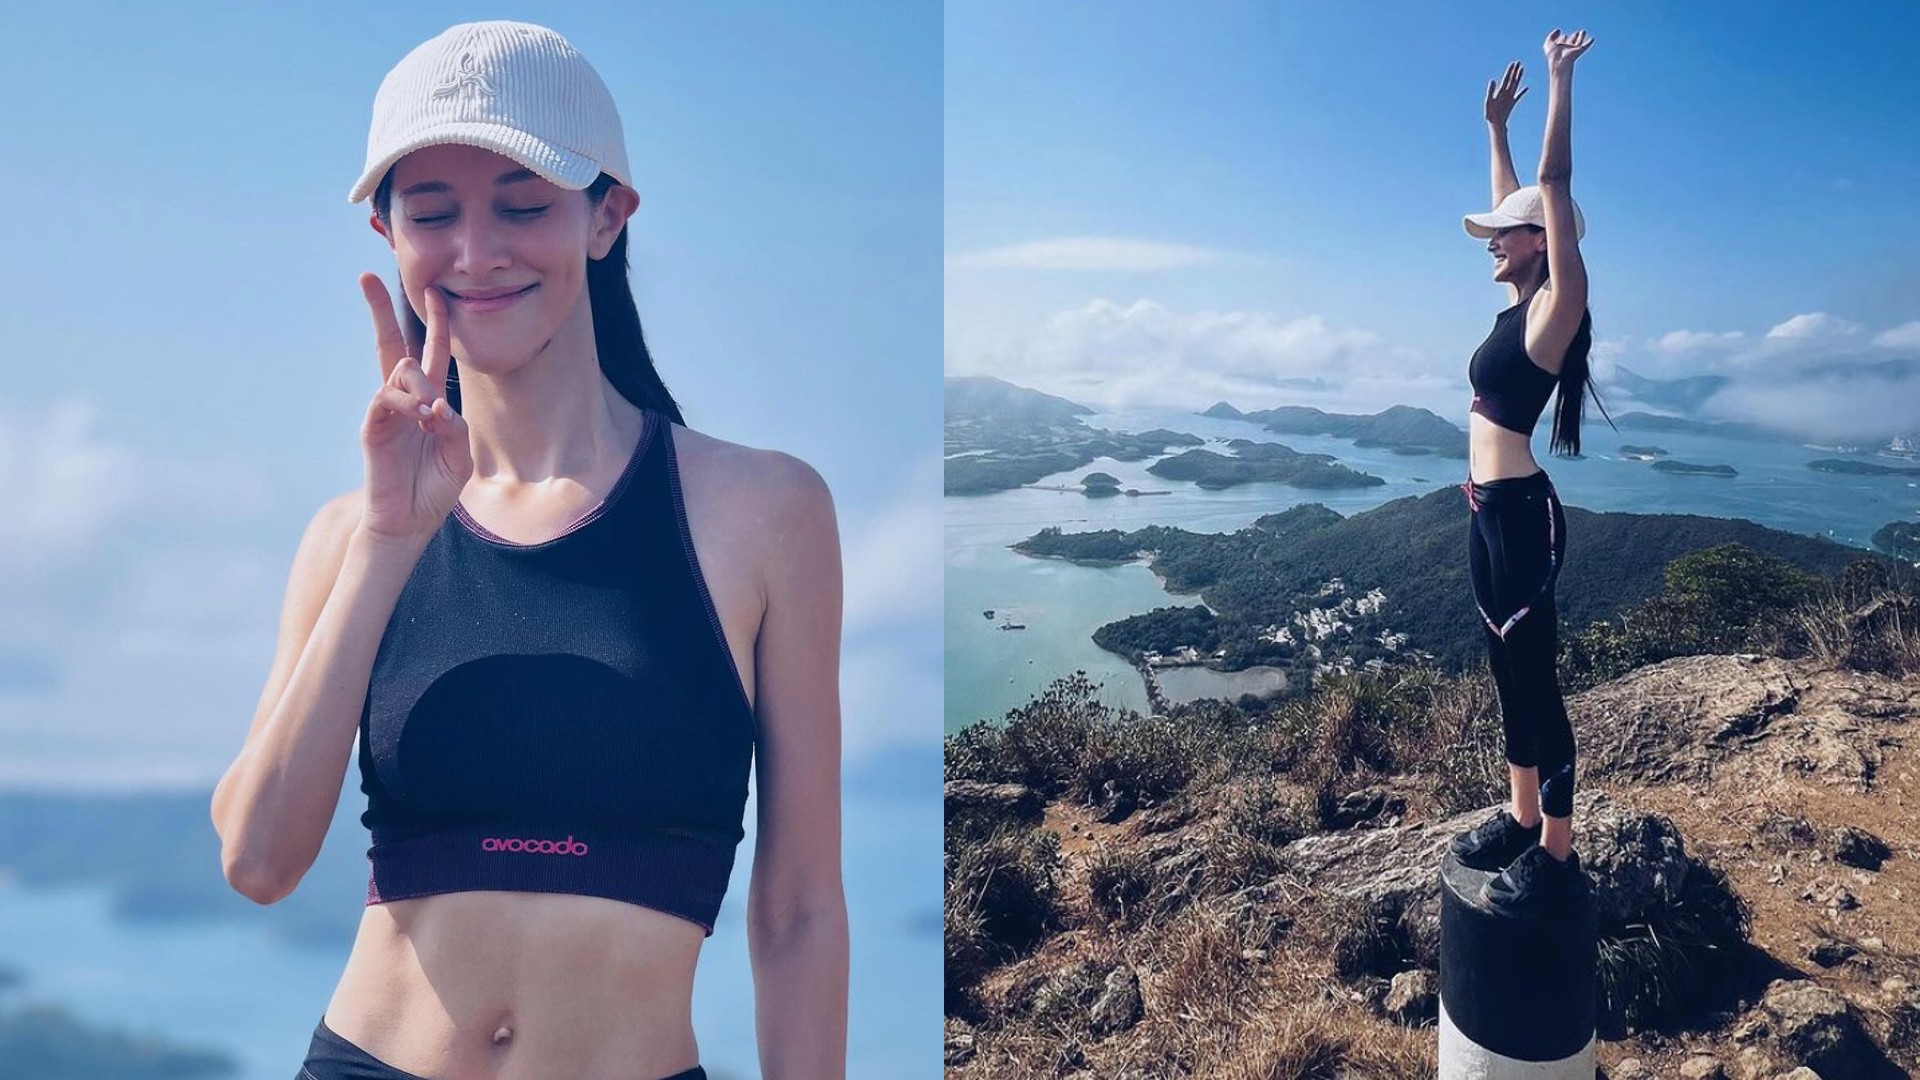 Grace Chan Judged For Wearing Sports Bra And Leggings To Go Mountain Hiking  - 8days